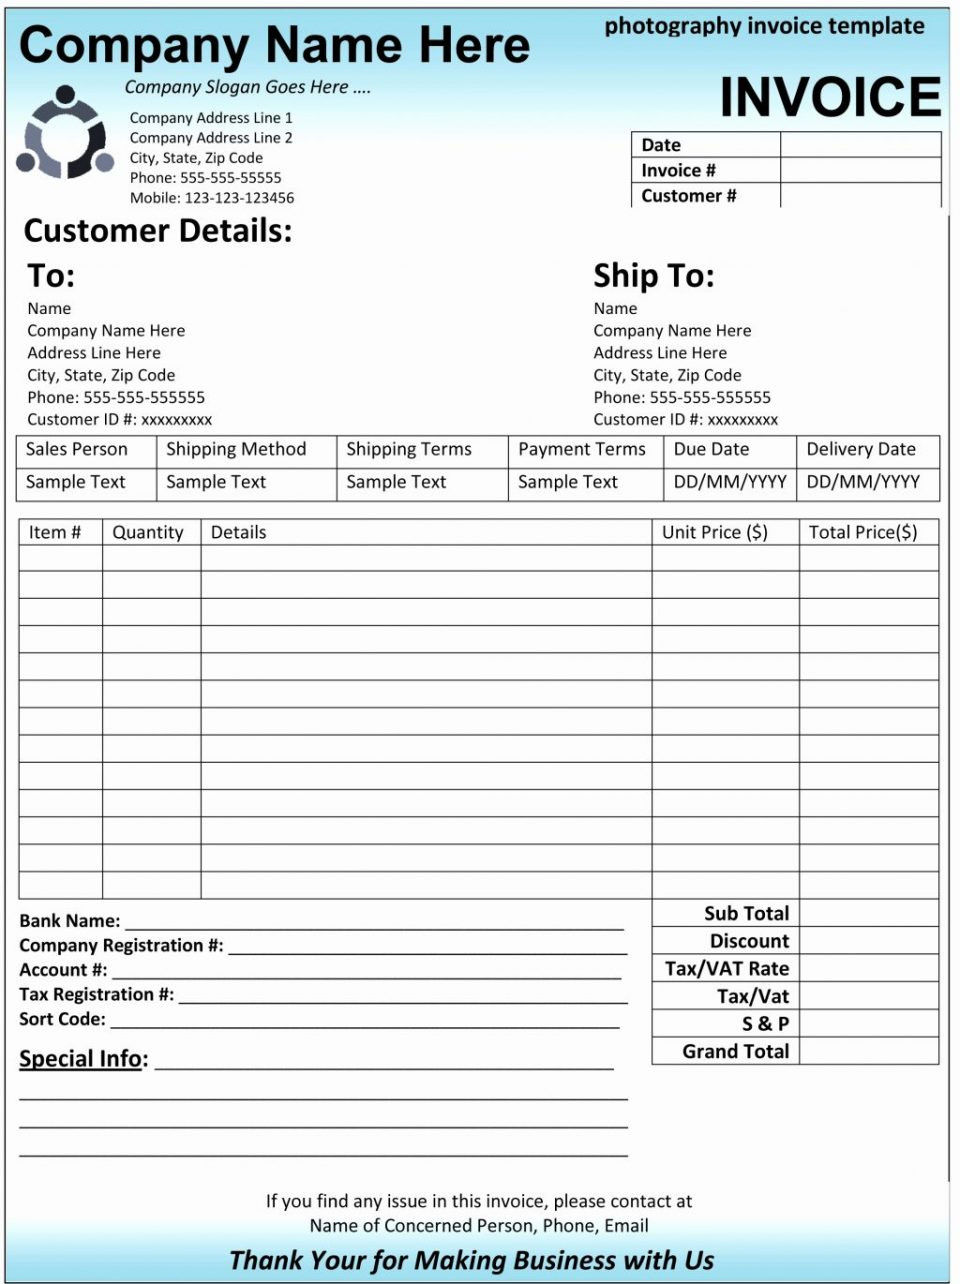 Home Daycare Tax Worksheet Spreadsheet Pro forma Template Daycare Expense Home Business